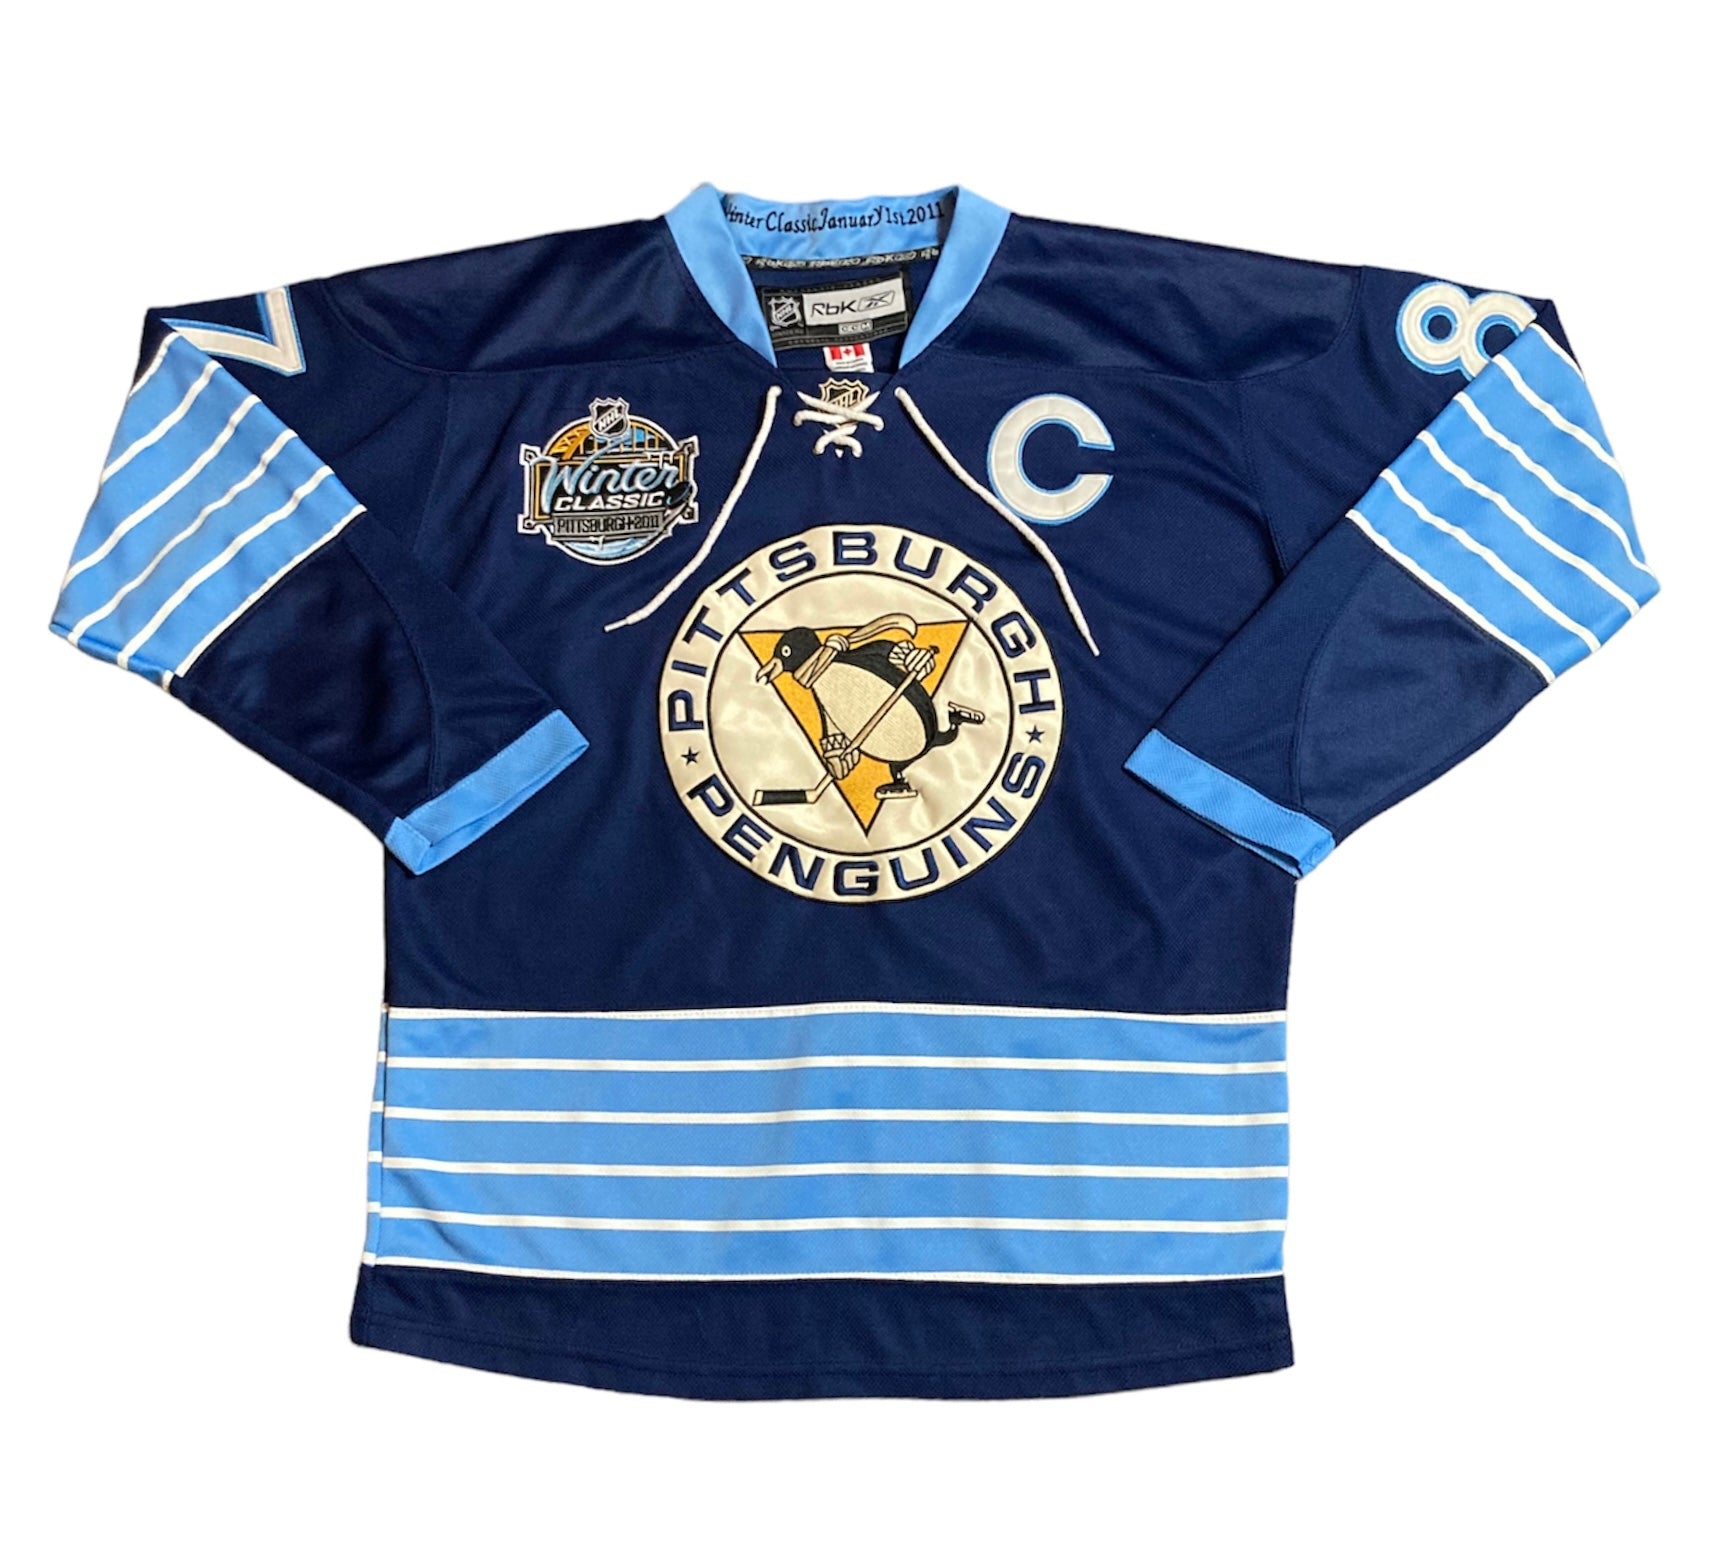 penguins winter classic jersey for sale